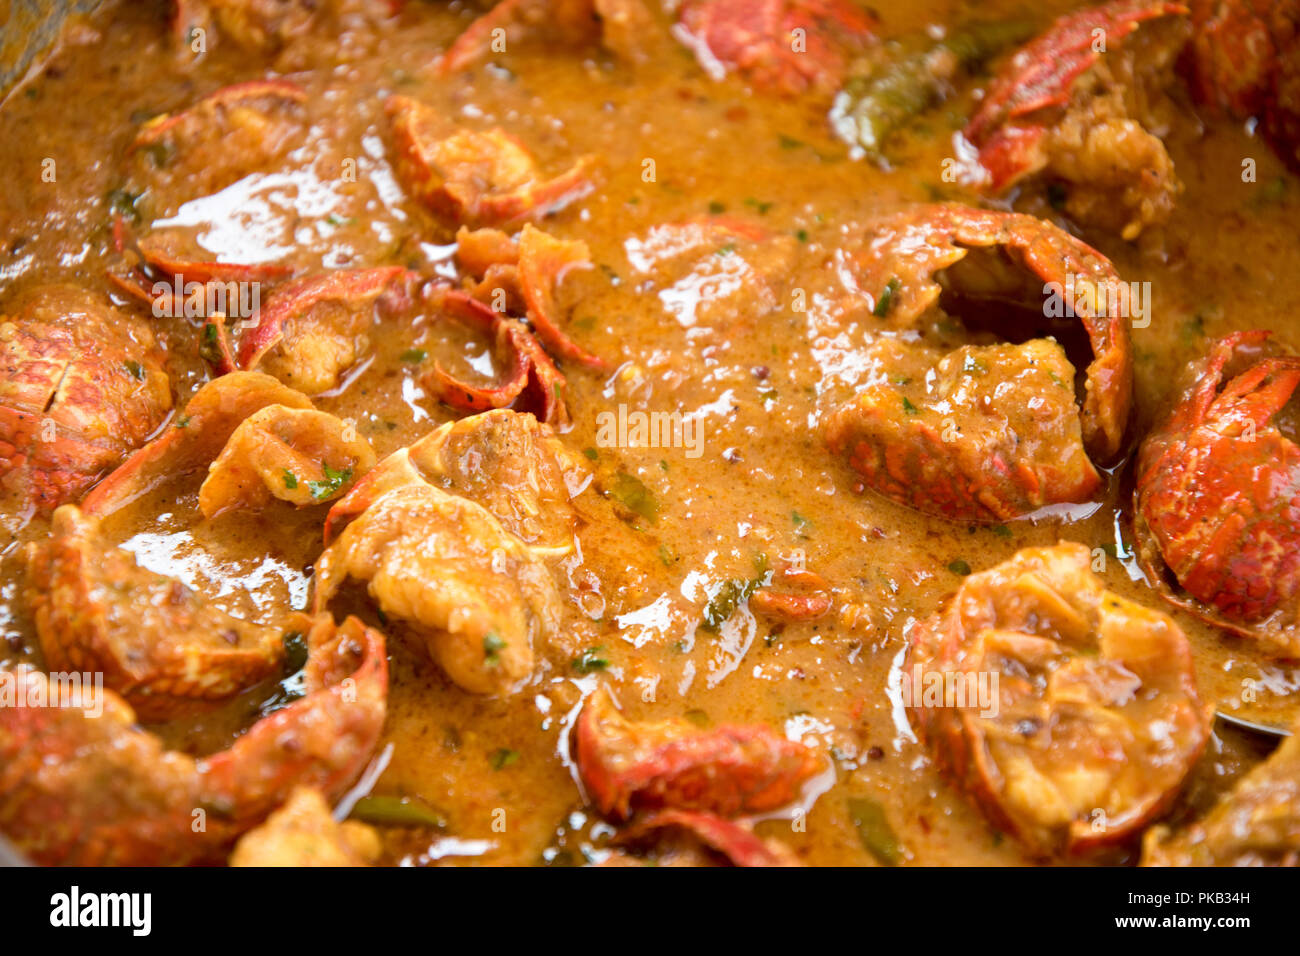 A Close Up Of A Spicy Seafood Or Crayfish Curry To Be Served With Authentic Indian Rice The Crayfish Boiled De Veined And Prepared As Curry Gravy Stock Photo Alamy